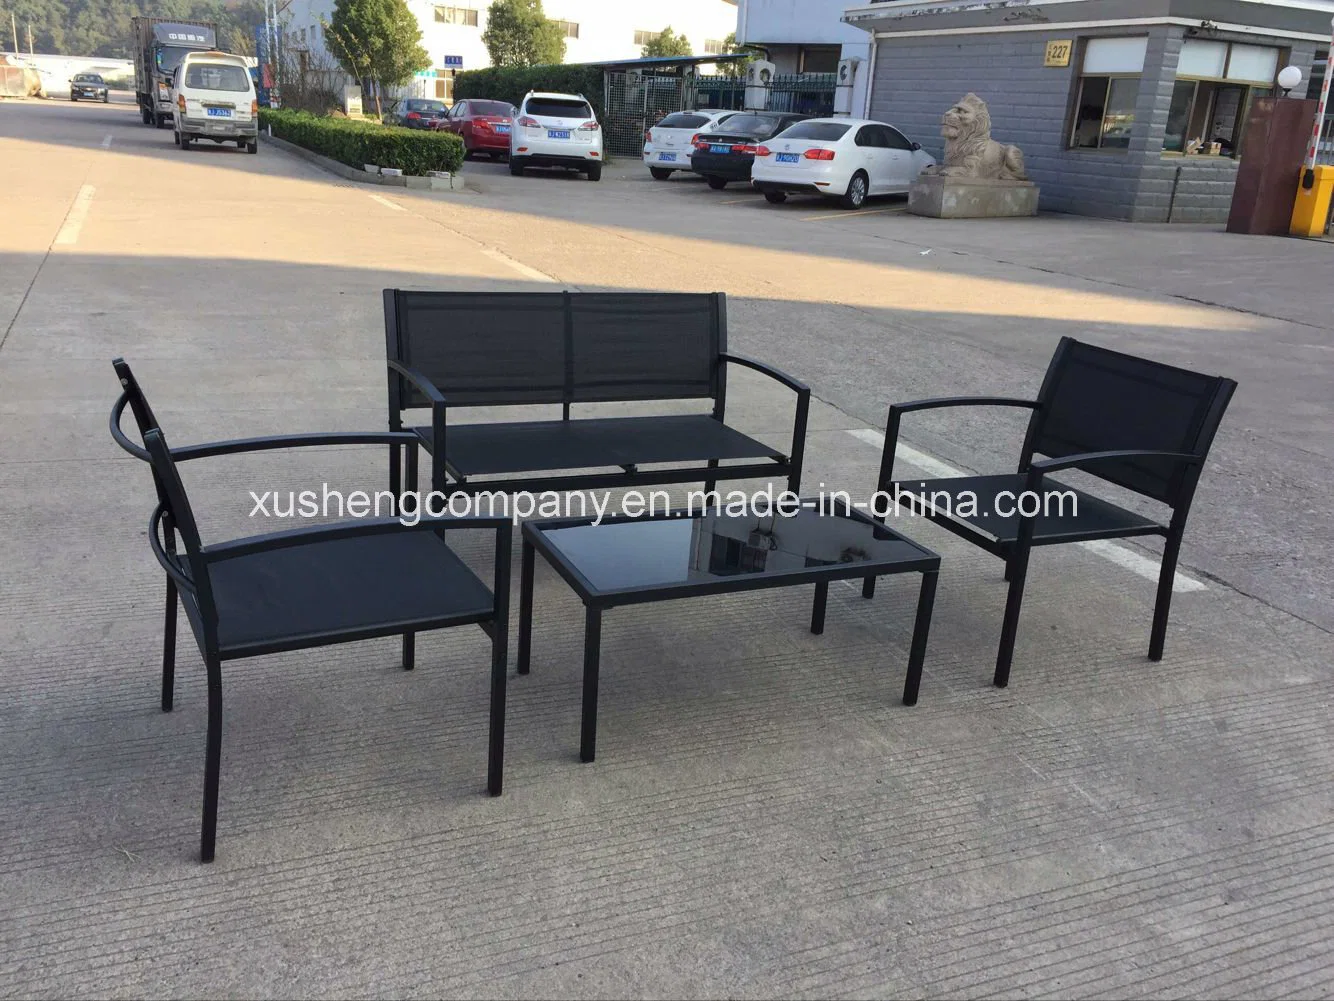 Outdoor Steel 4PCS Moder Furniture Set by Square Table+Chairs